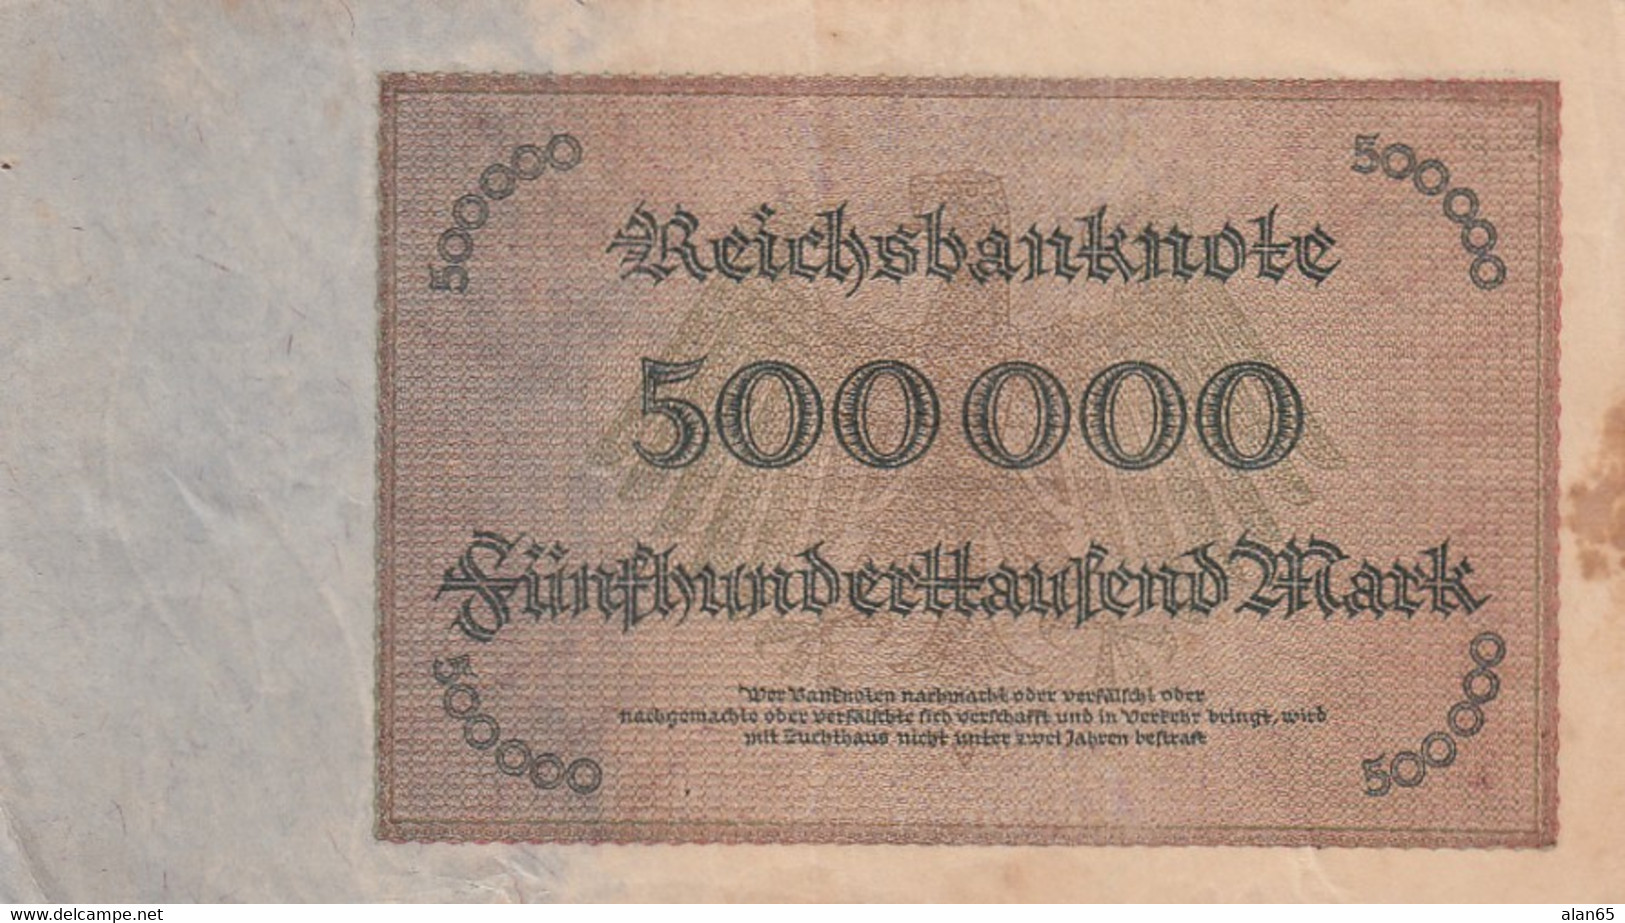 Germany #88b, 500,000 Marks 1.5.1923 Reichsbanknote Small Serial # At Left On Front Only Banknote Currency - 500000 Mark